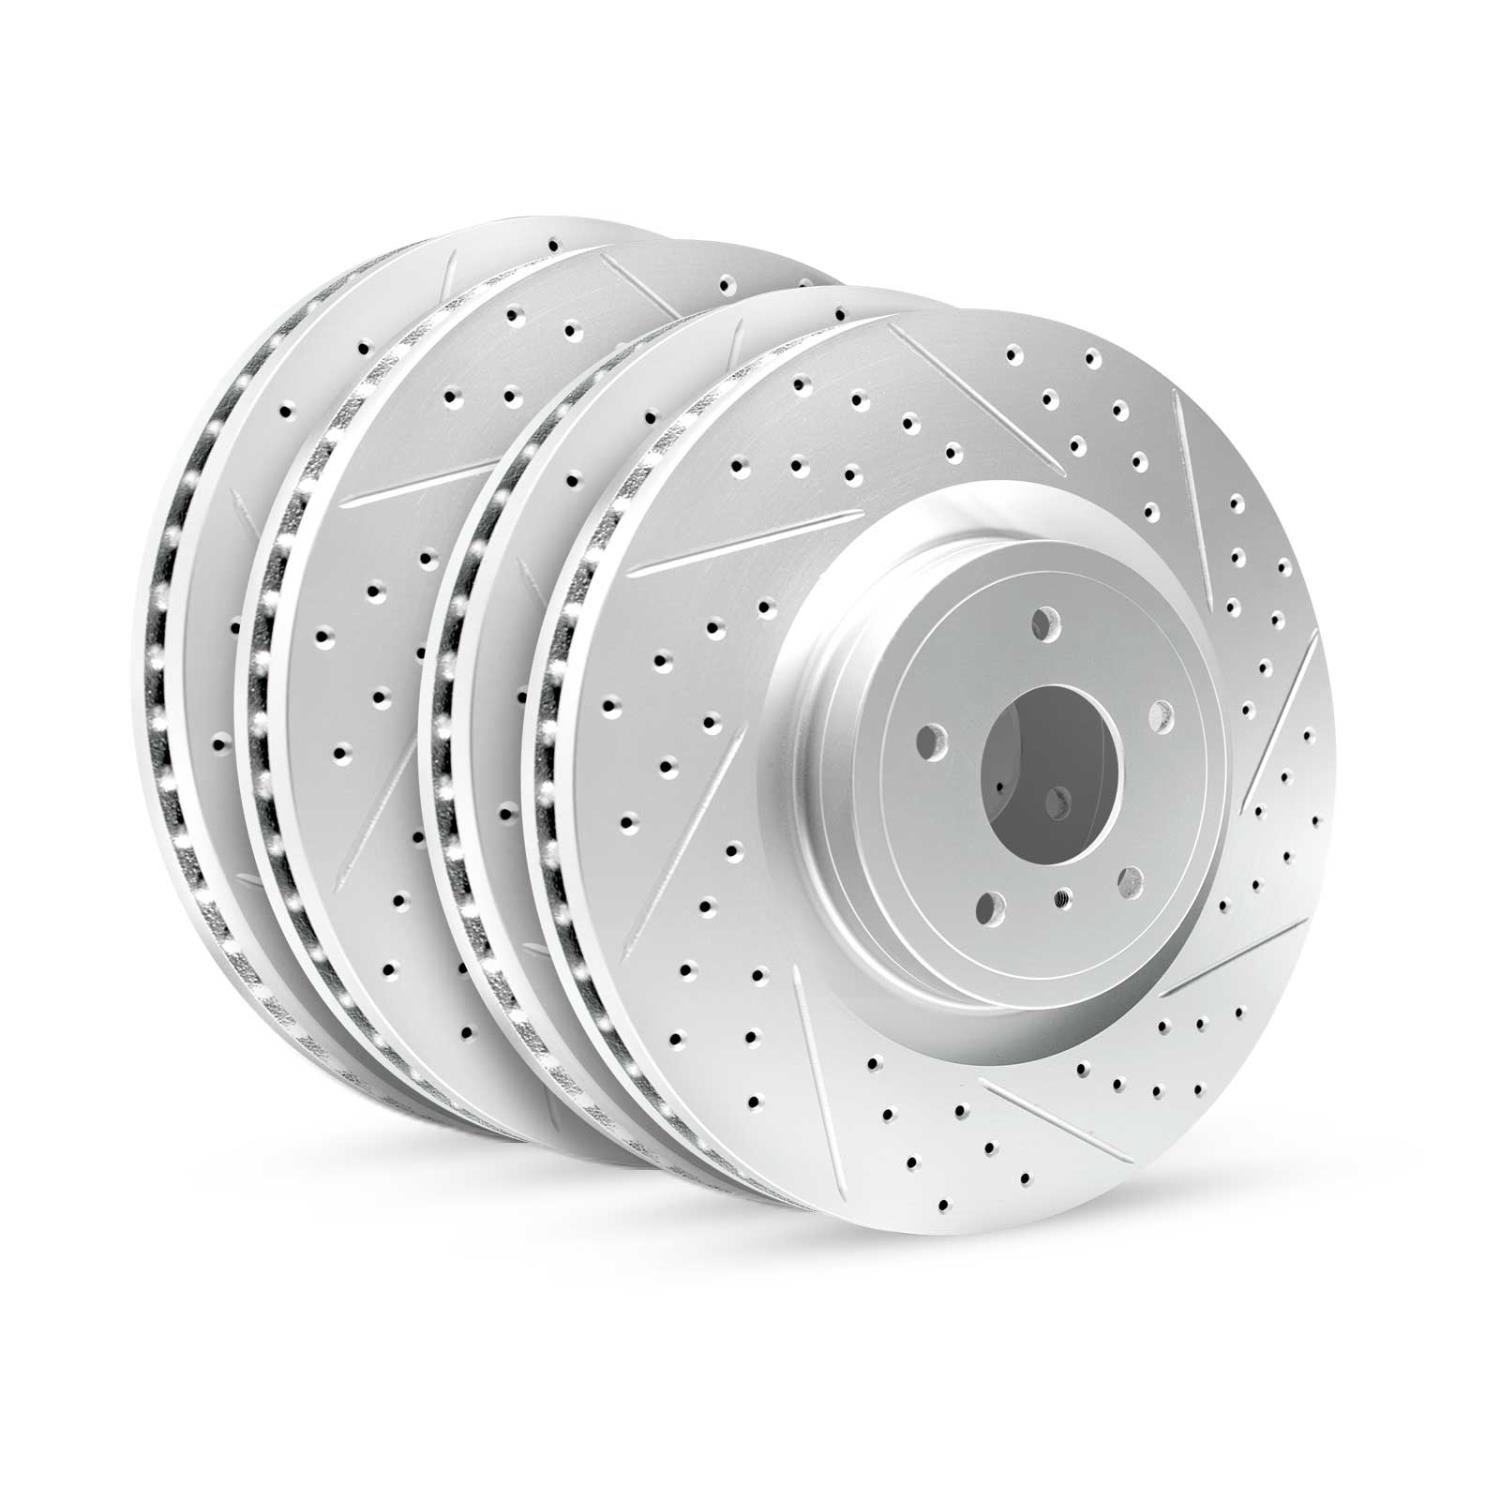 GEO-Carbon Drilled/Slotted Rotors, 2009-2015 Mitsubishi, Position: Front/Rear